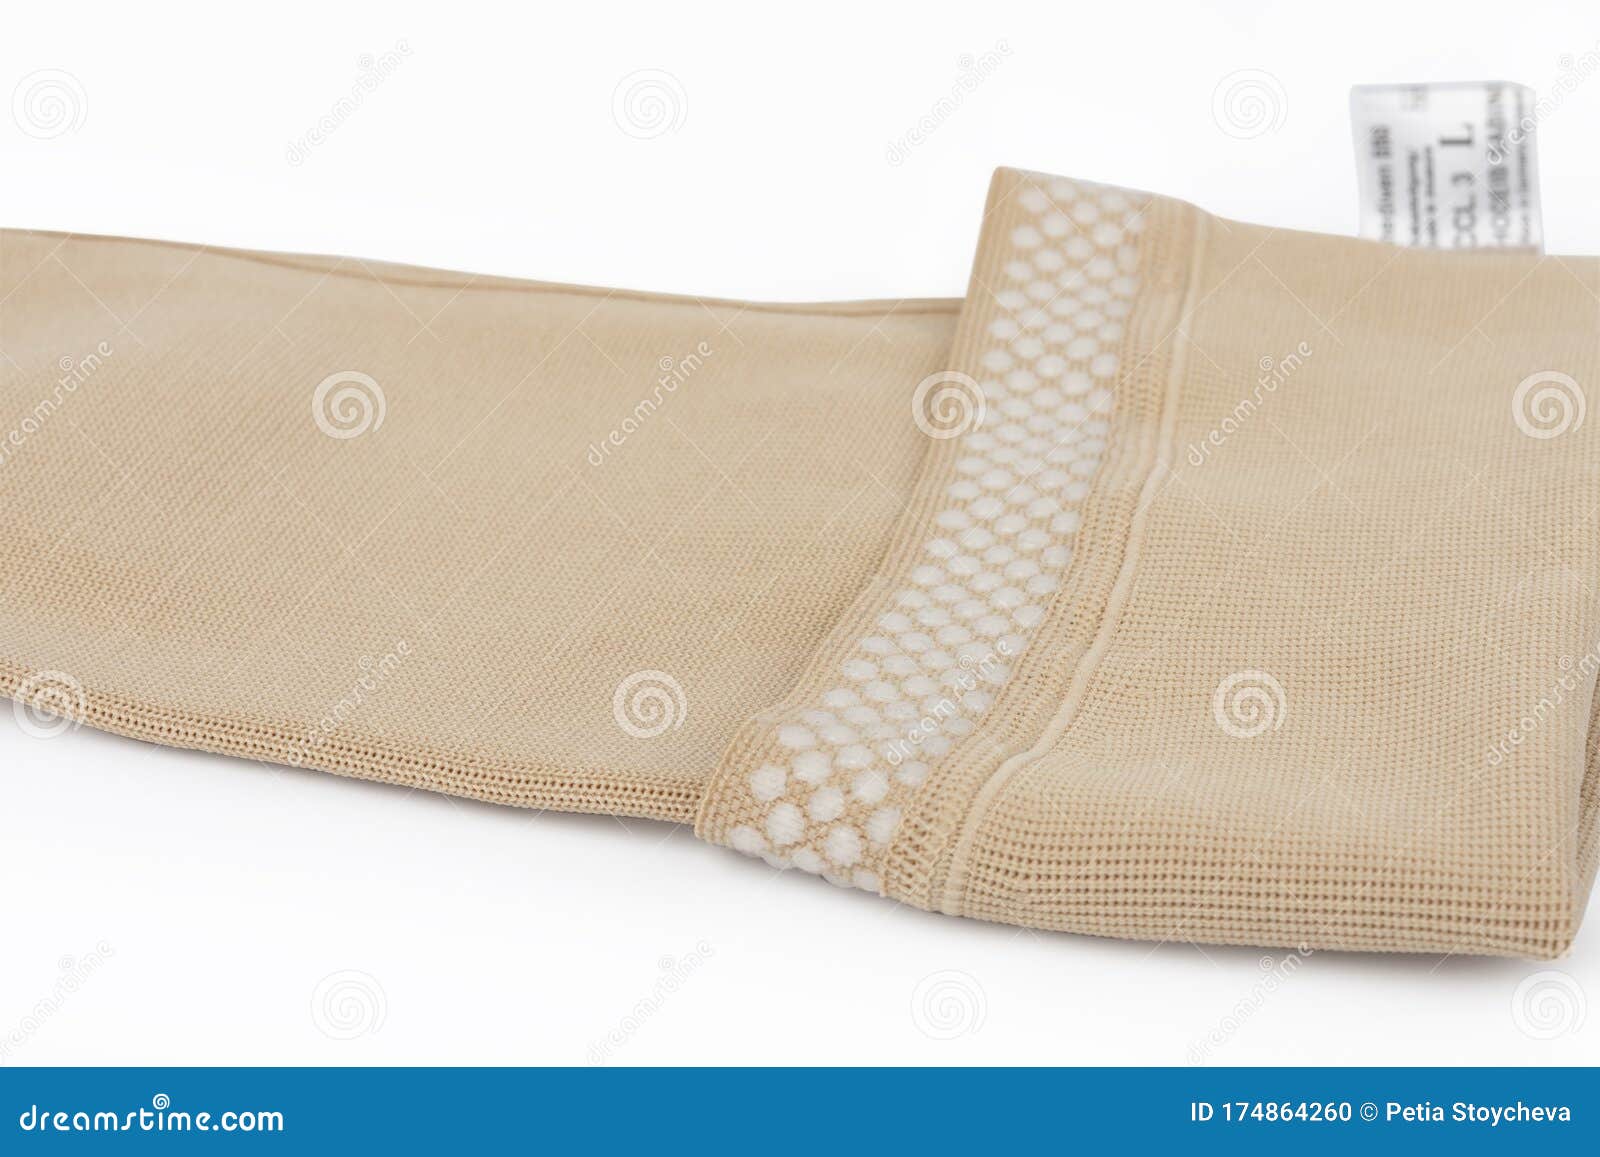 Close Up of Flat Knit Graduated Compression Garments for Leg Lymphedema,  Edema and Lipedema - Powerful Compression Stocking for Stock Photo - Image  of extremity, limfedem: 174864260